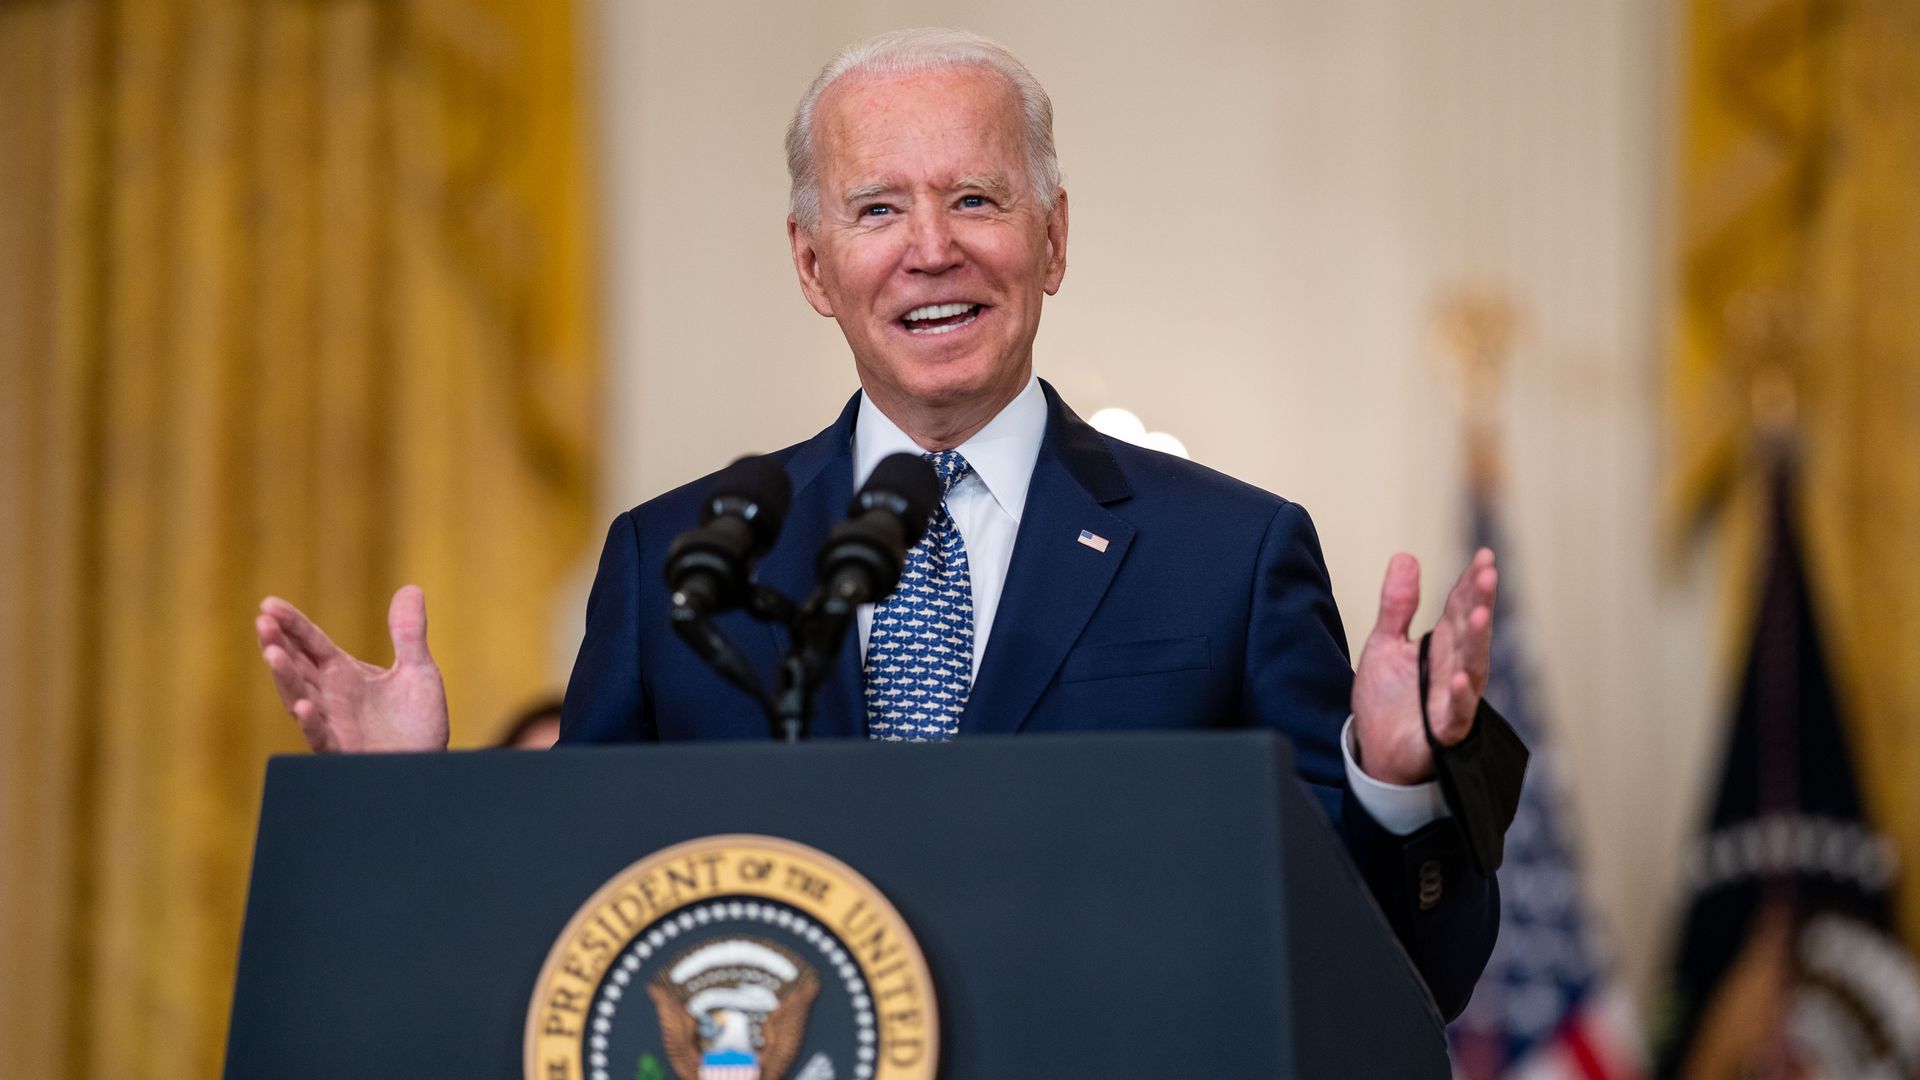 President Joe Biden delivers remarks on the Senate approving H.R. 3684 Infrastructure Investment and Jobs Act,